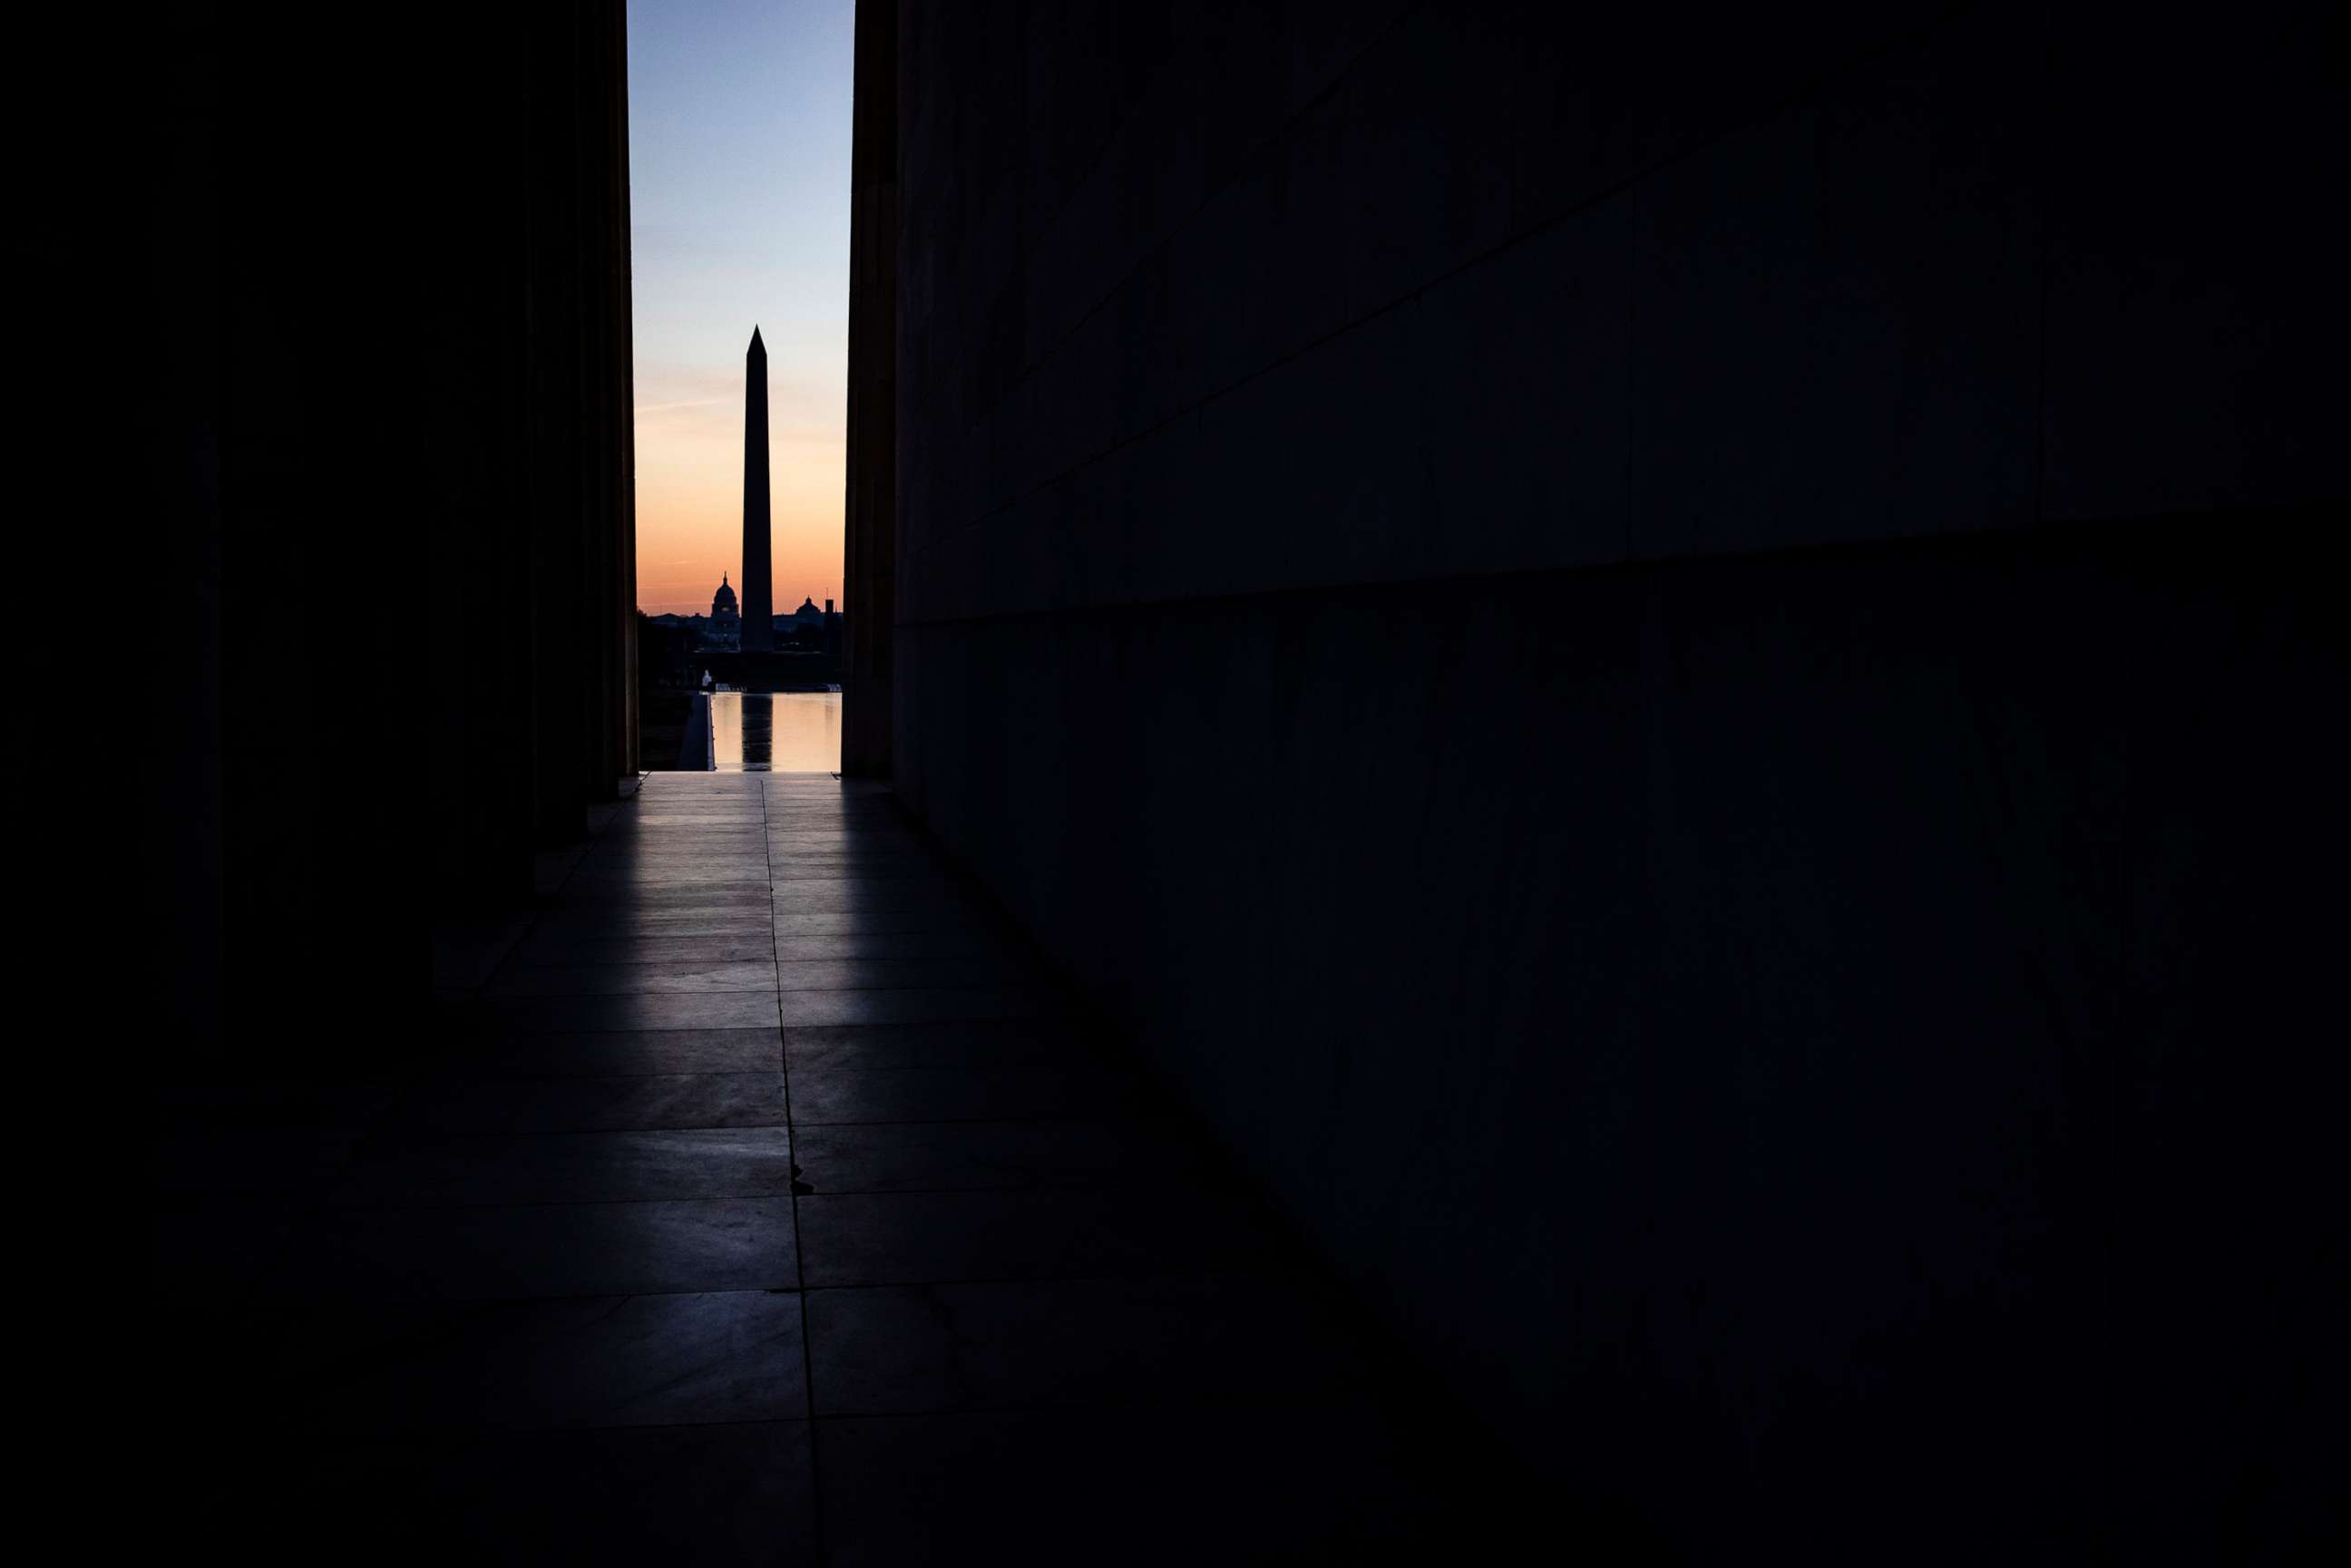 PHOTO: The U.S. Capitol Building and Washington Monument are seen across the National Mall from the Lincoln Memorial as the sun rises on Dec. 27, 2020 in Washington, D.C.